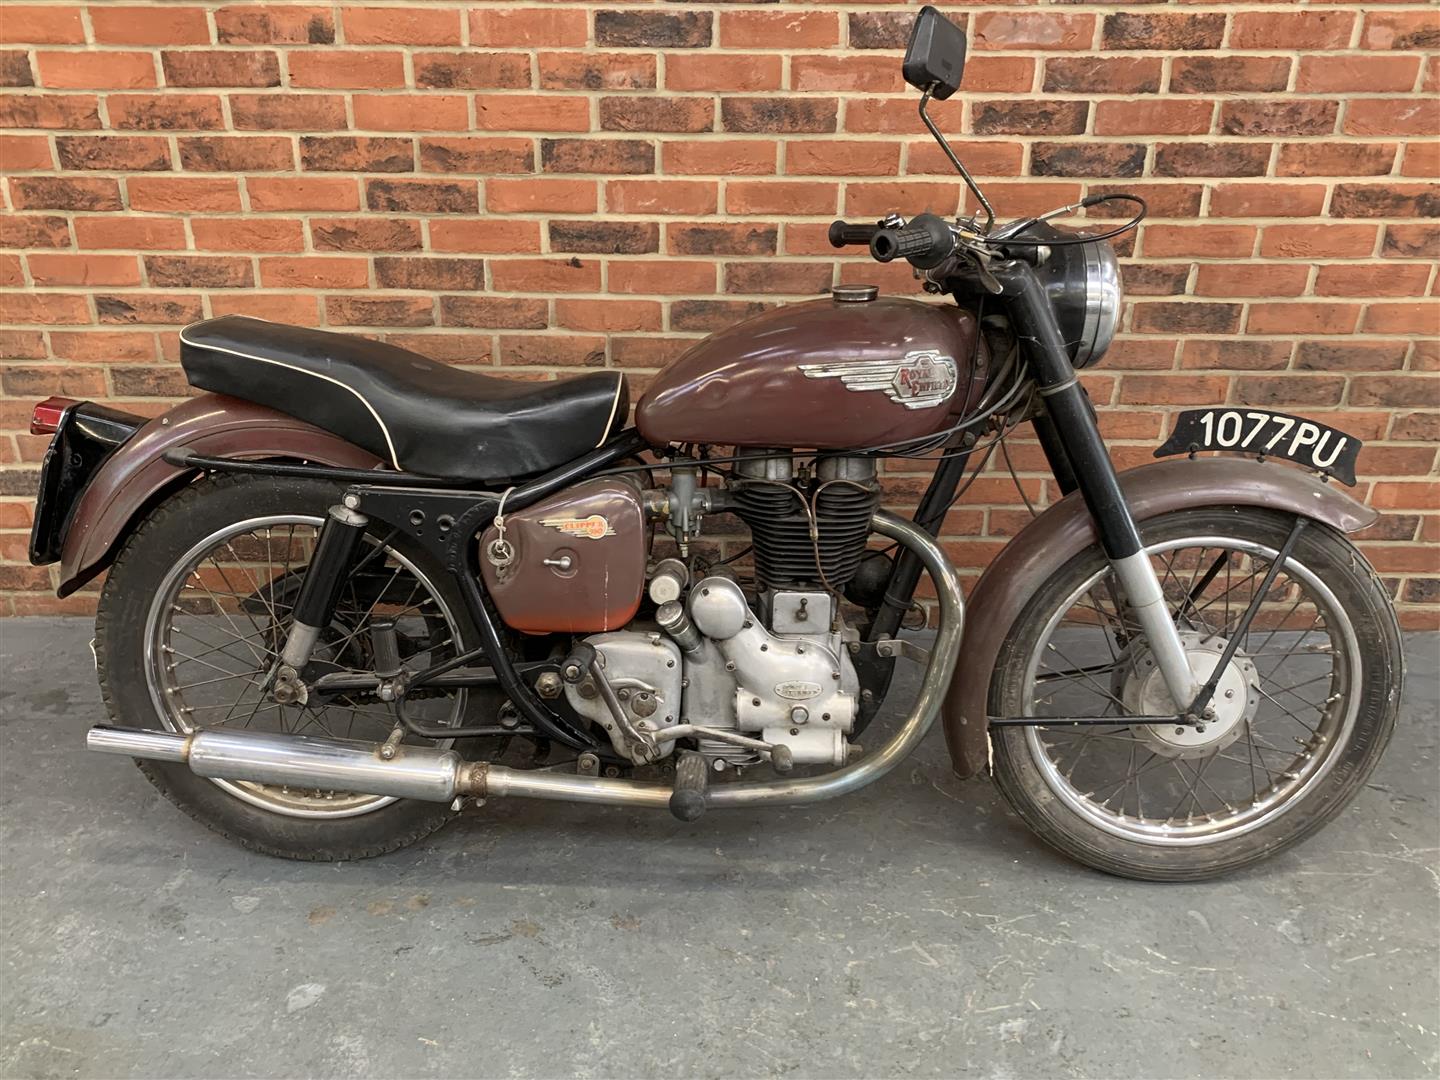 1959 Royal Enfield Clipper 350cc - Image 2 of 16